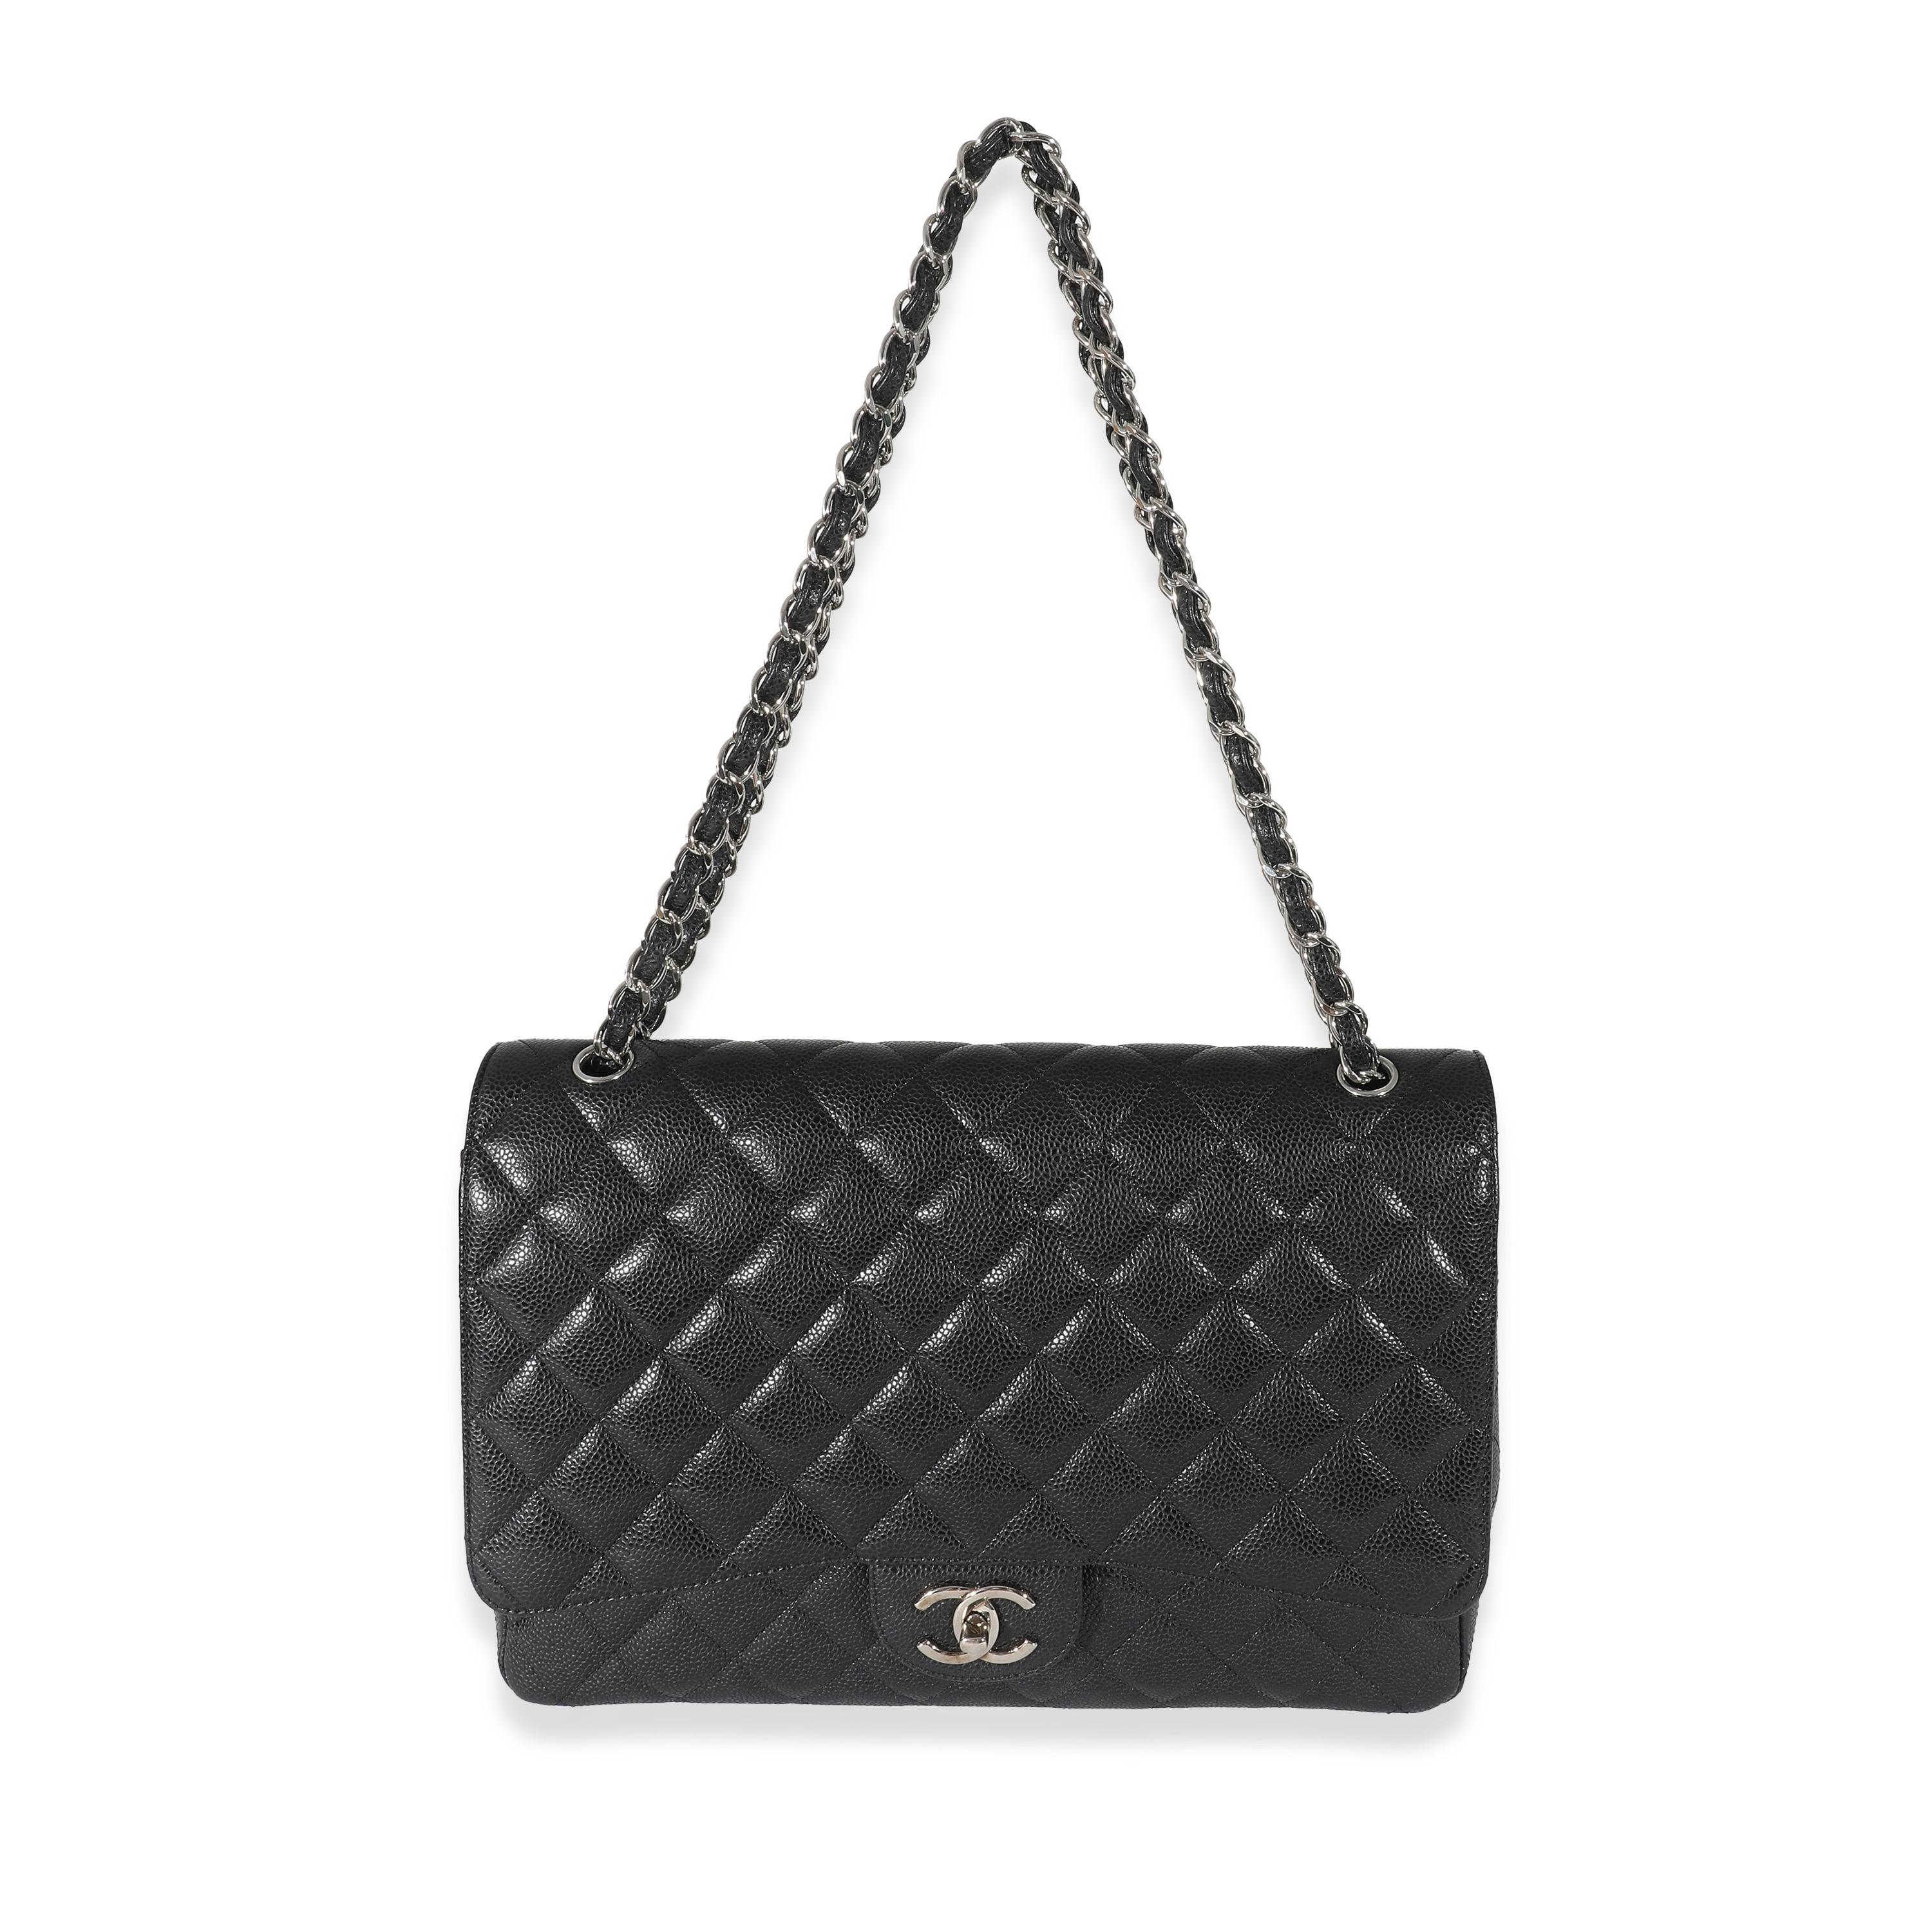 Listing Title: Chanel Black Quilted Caviar Maxi Double Flap Bag
SKU: 133321
MSRP: 11500.00 USD
Condition: Pre-owned 
Handbag Condition: Very Good
Condition Comments: Item is in very good condition with minor signs of wear. Exterior corner scuffing.